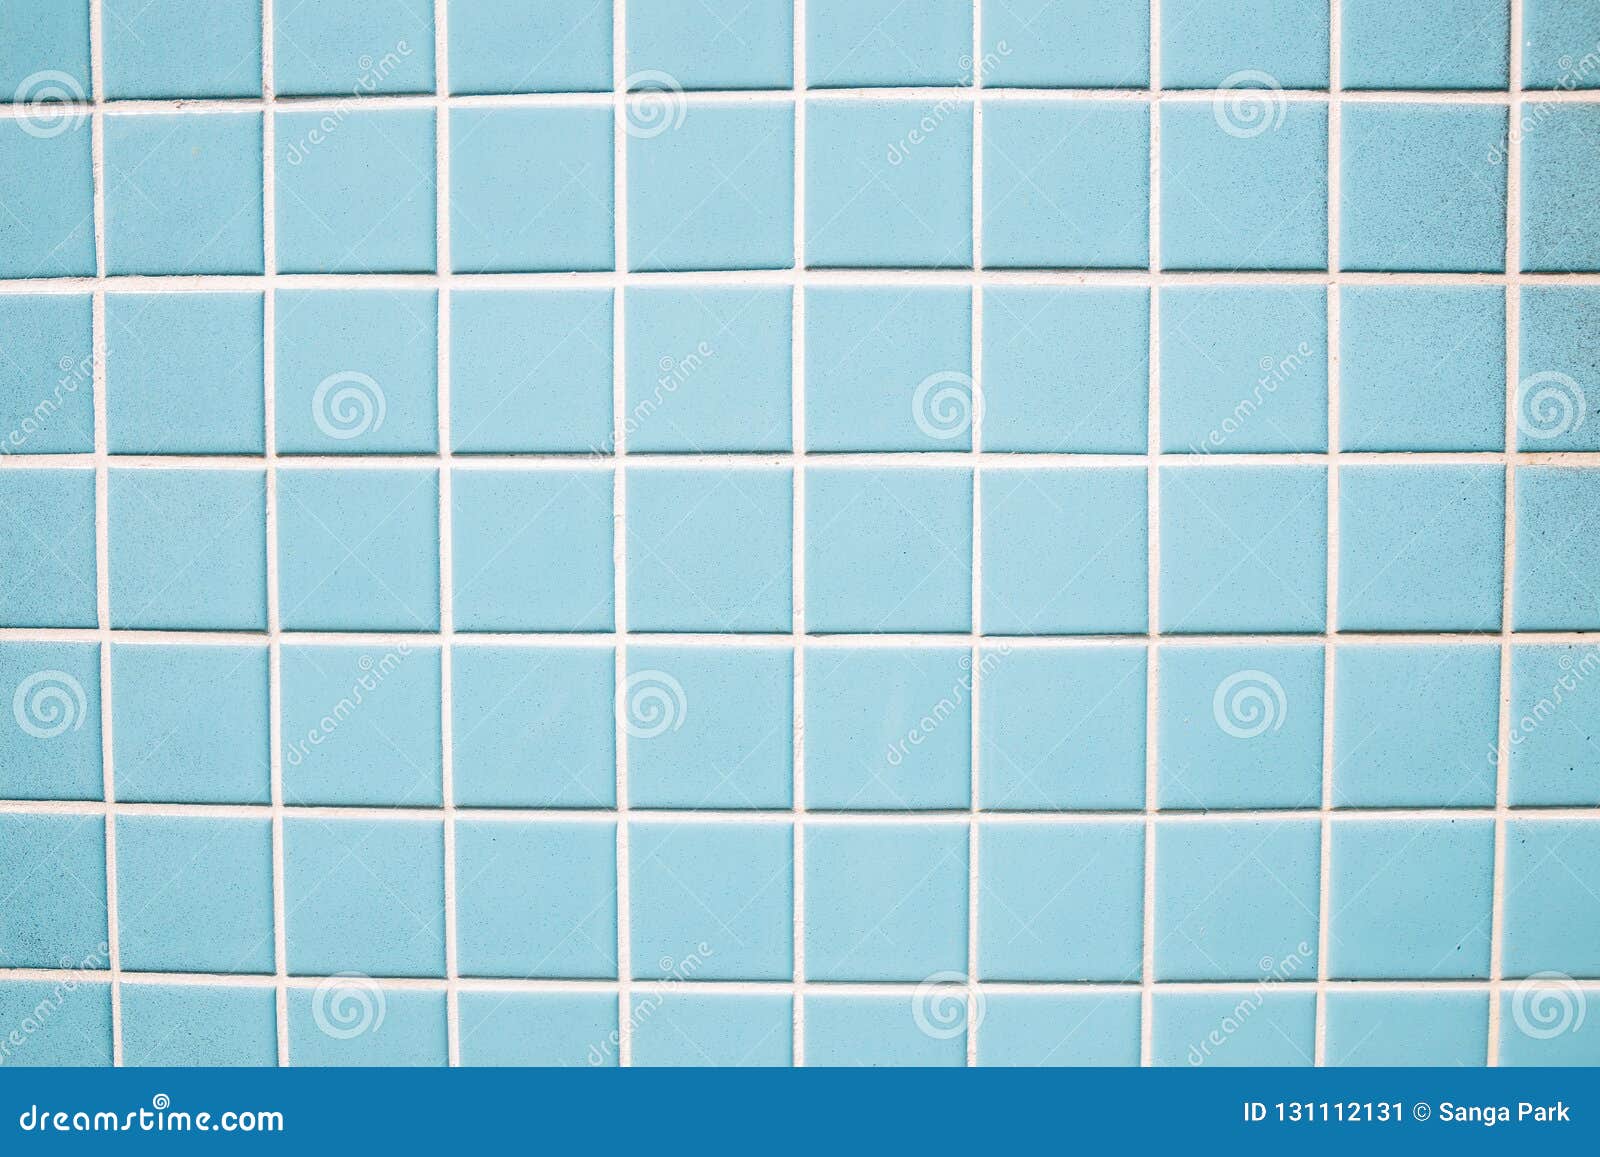 Light Blue Tile Wall Stock Image Image Of Graphic